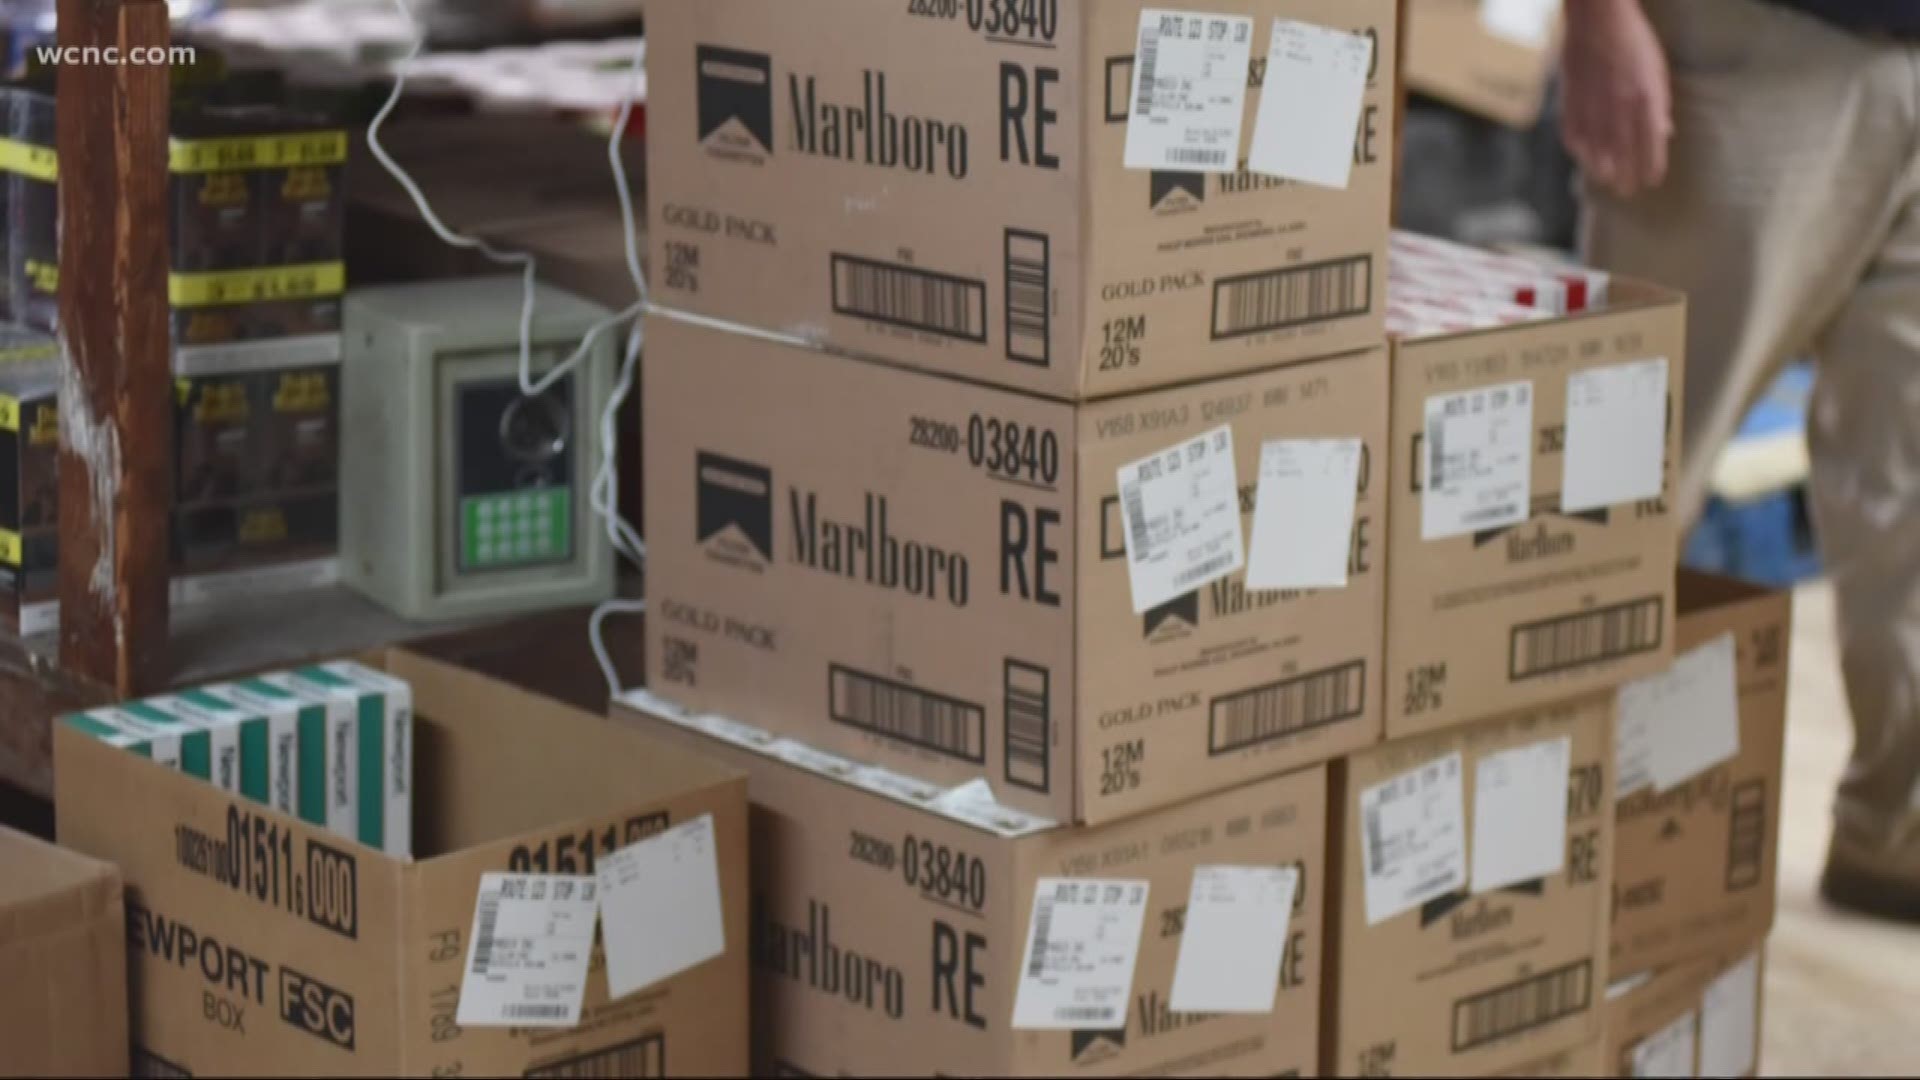 The massive cigarette trafficking ring spanned five states. Police say buyers would purchase cartons of cigarettes in NC where the taxes are relatively low. Then, those cigarettes would be shipped up to NY, where the taxes are much higher.